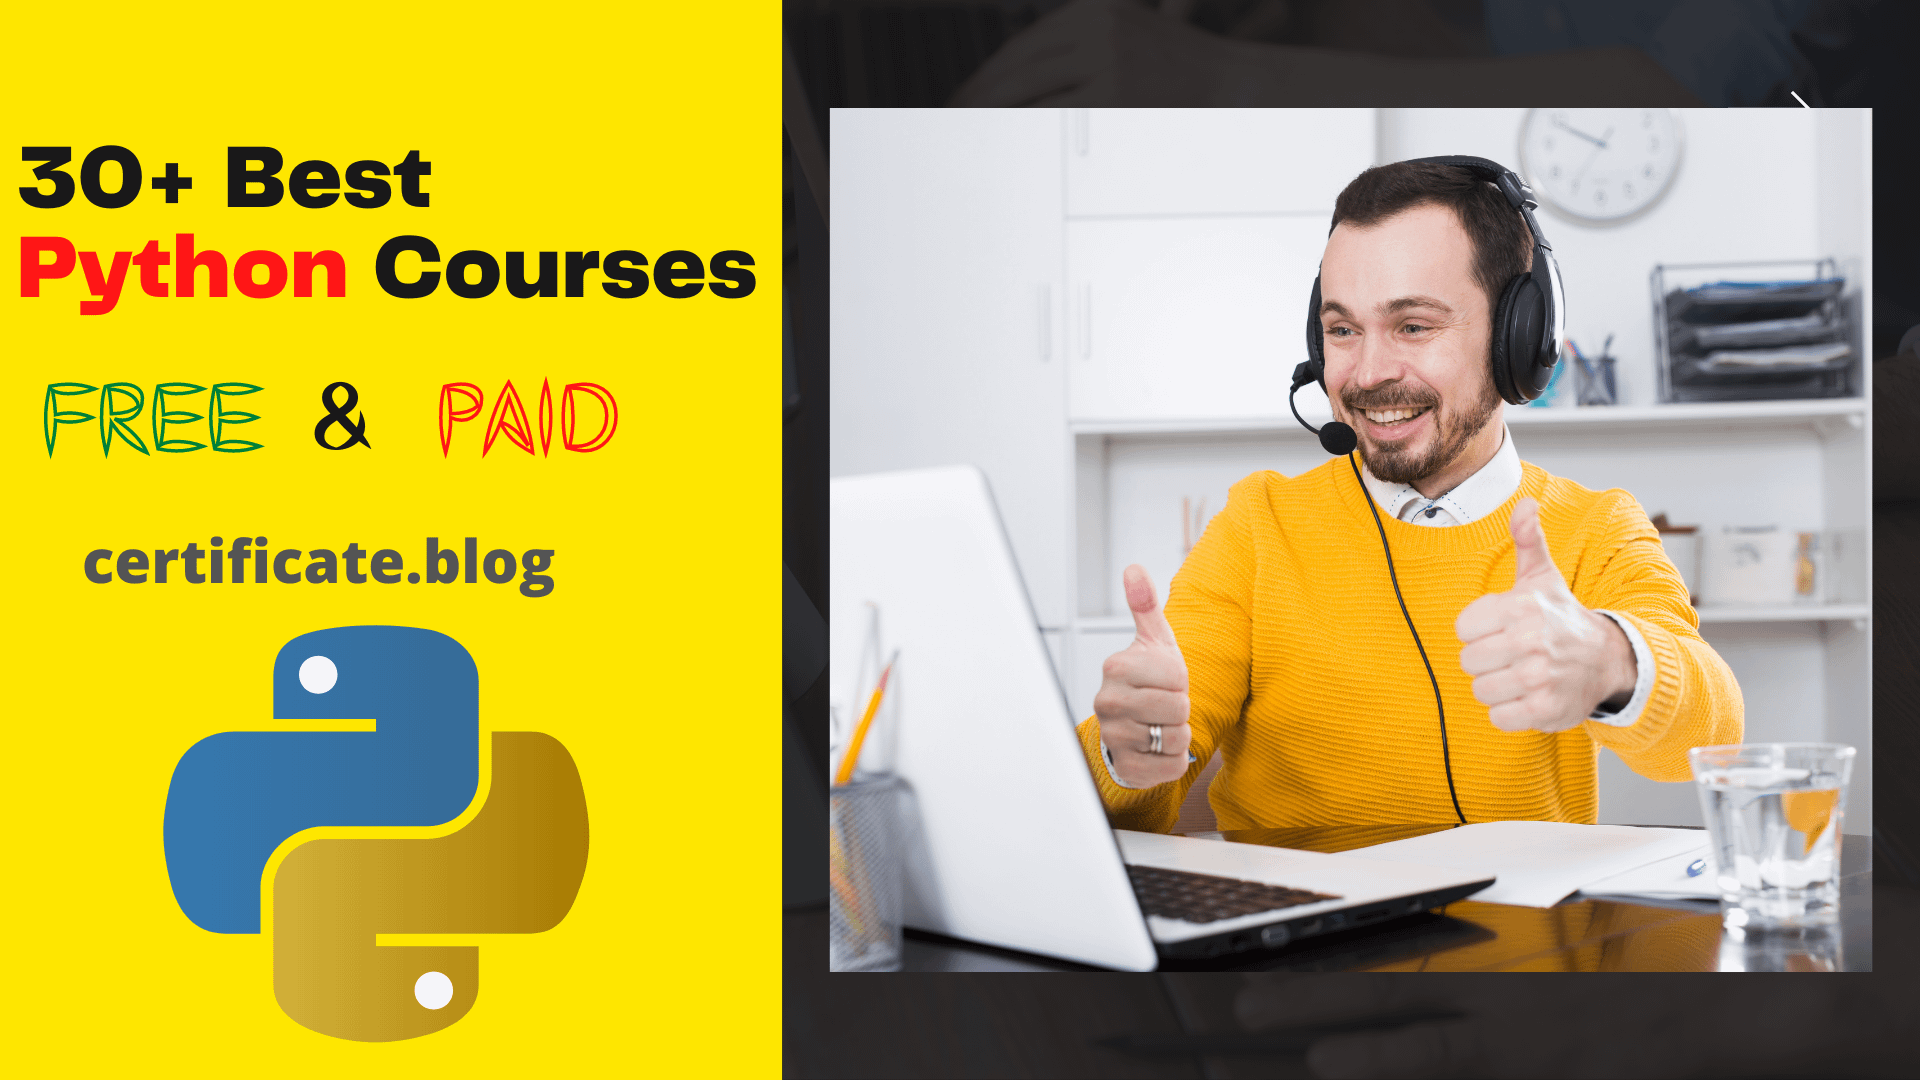 30+ Best Python Courses Free & Paid 2021